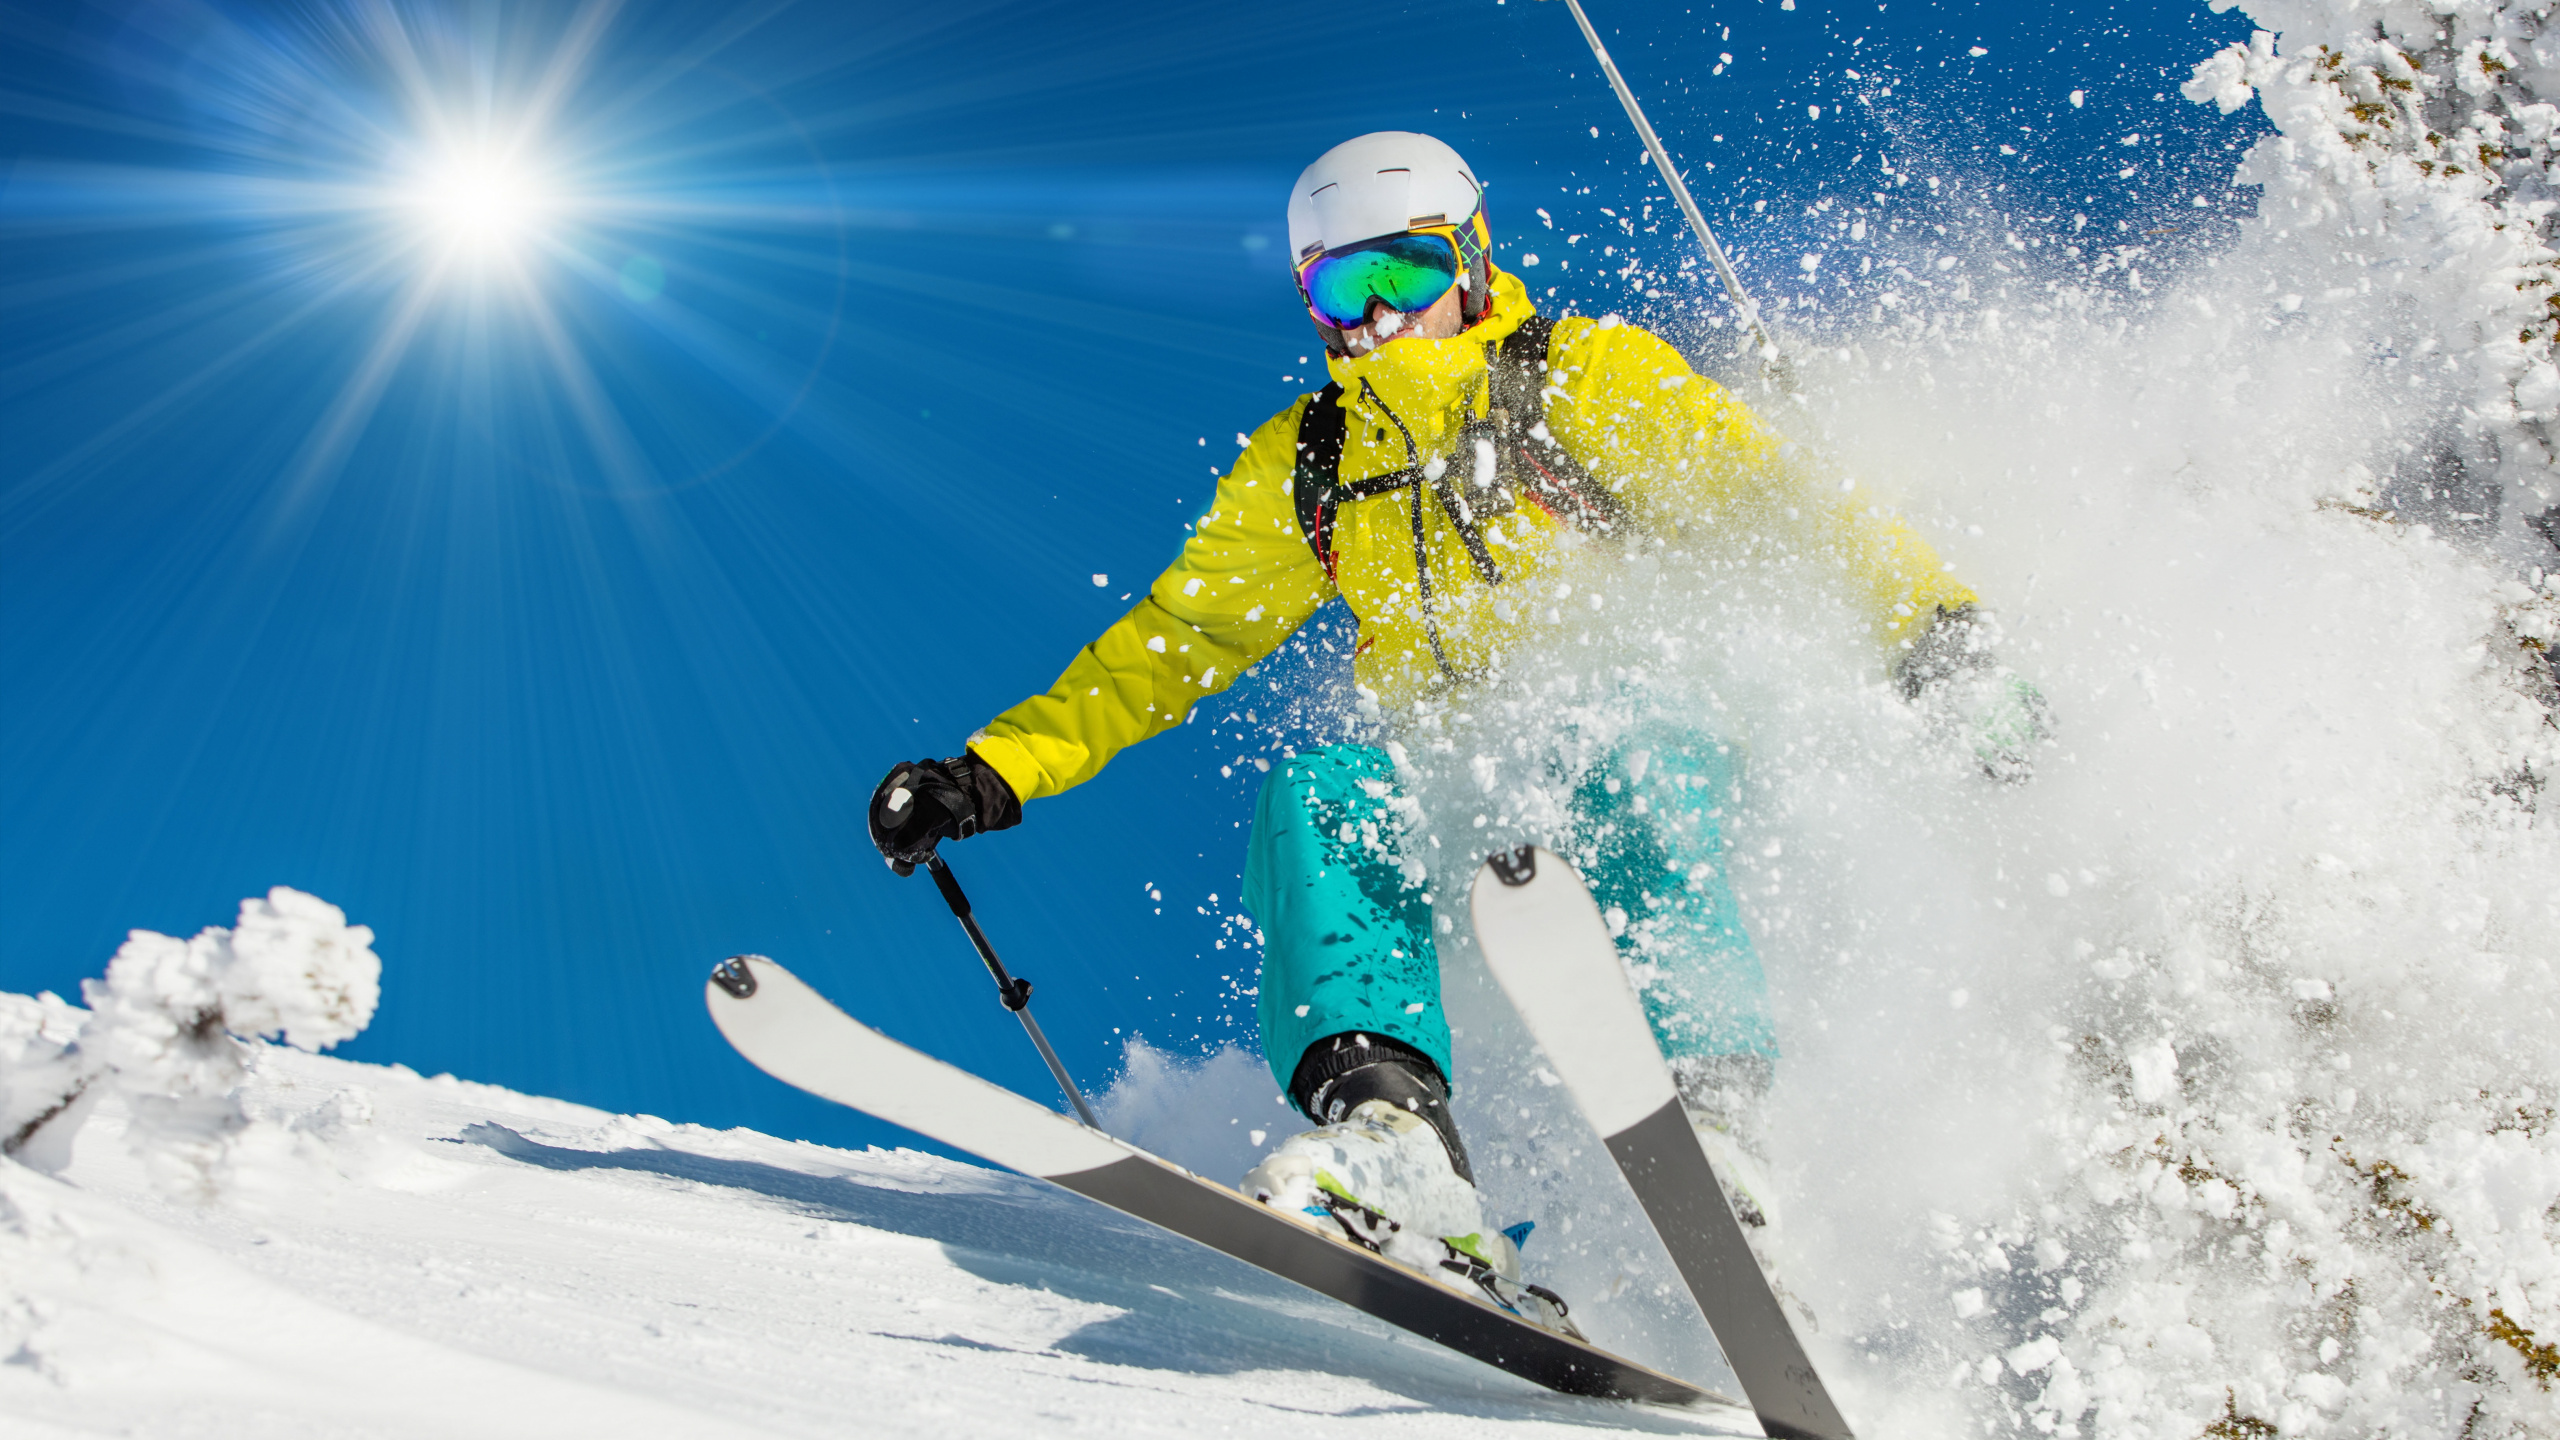 Person in Yellow Jacket and Red Helmet Riding on White and Red Snowboard During Daytime. Wallpaper in 2560x1440 Resolution